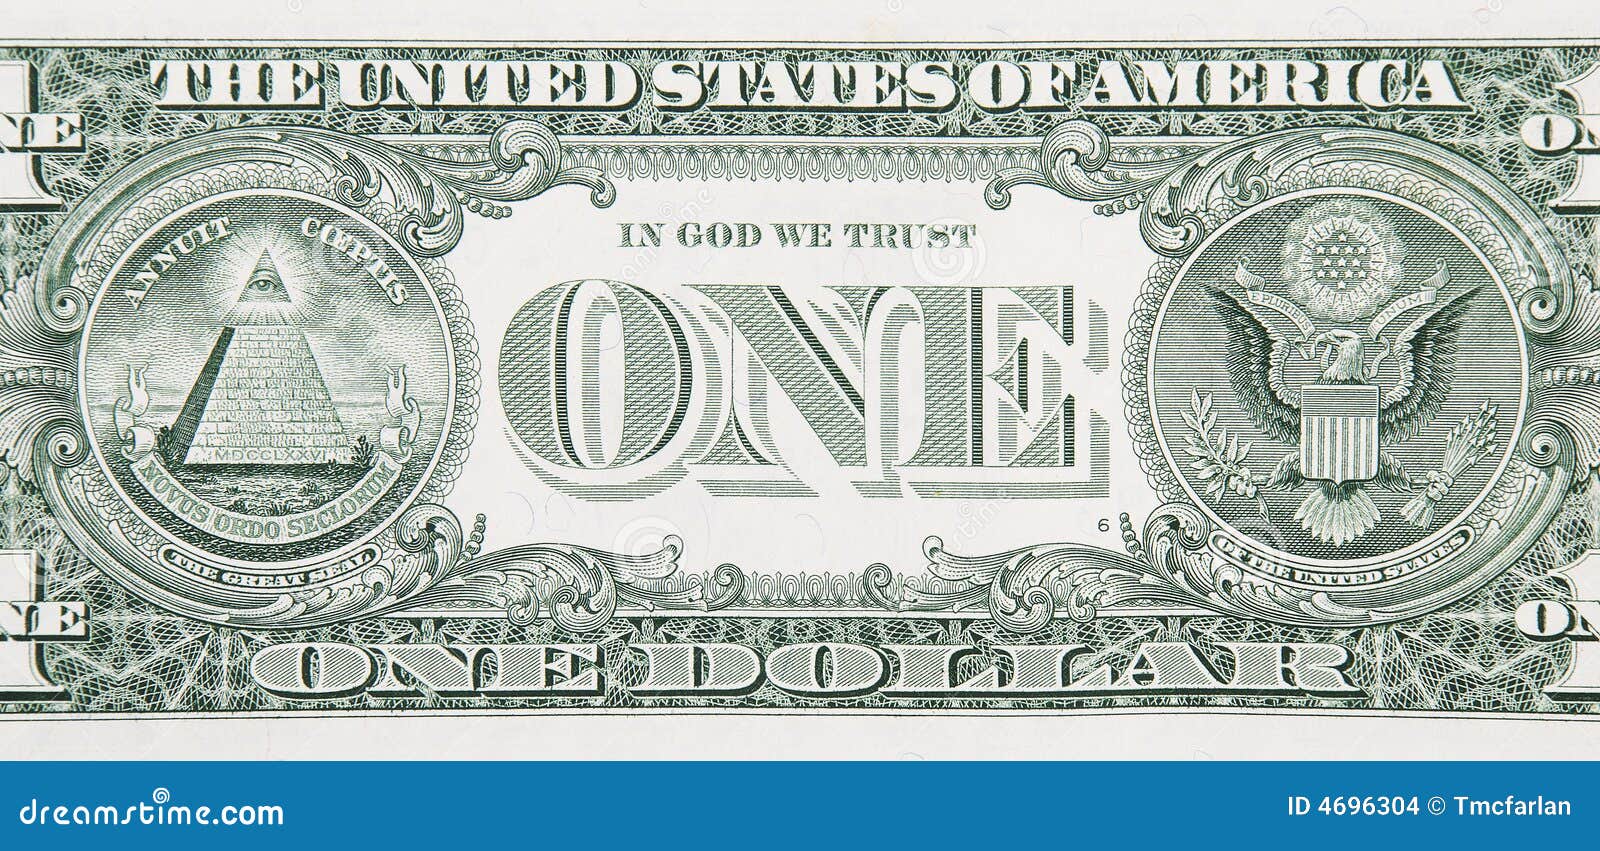 One Dollar Bill Back Close Up Stock Images Image 4696304